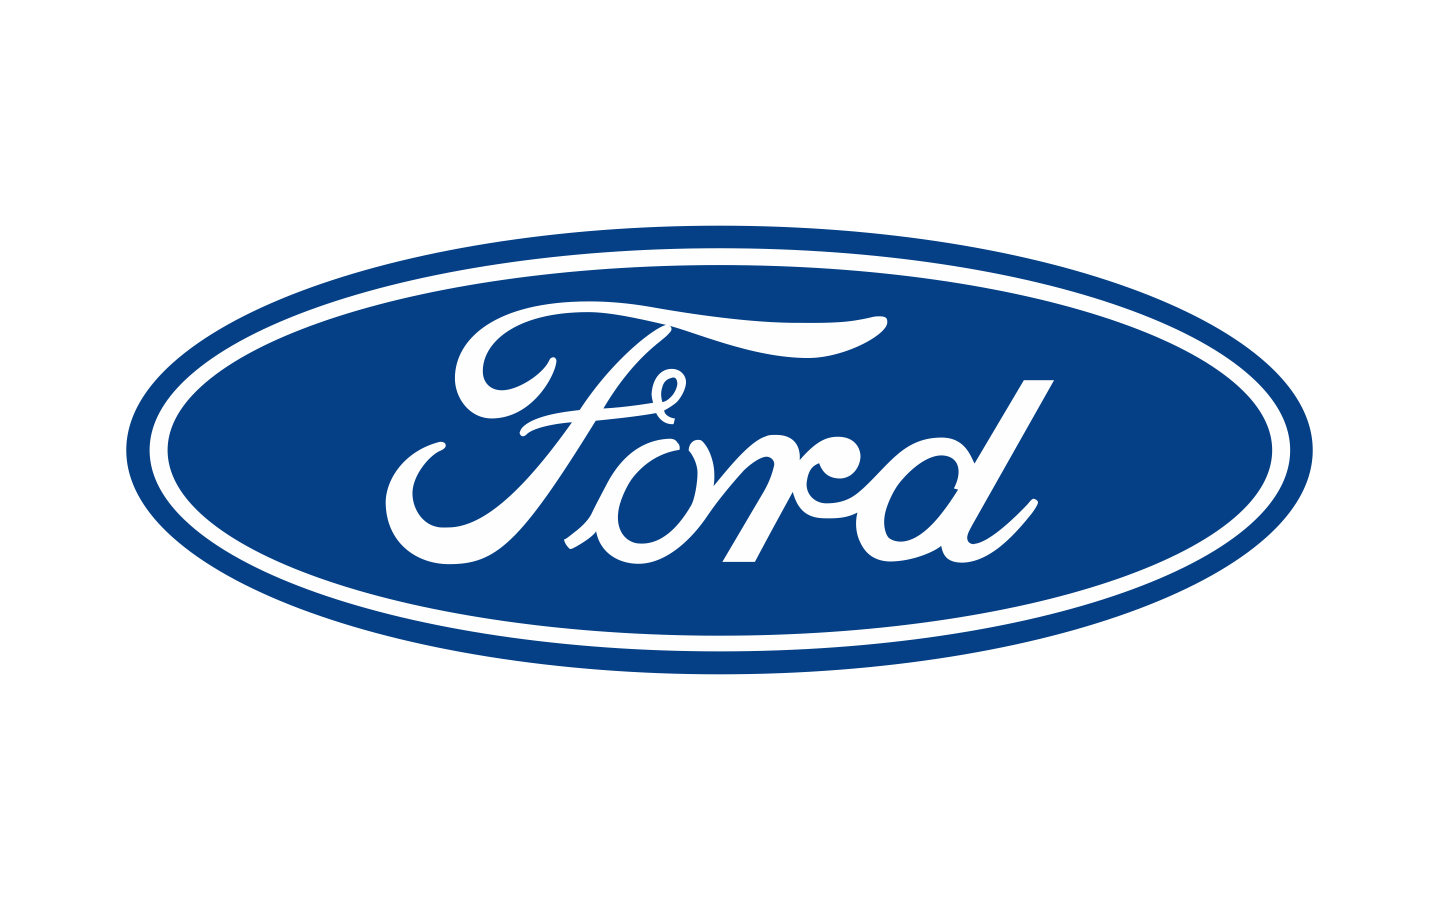 Ford Car Logos | www.pixshark.com - Images Galleries With ...